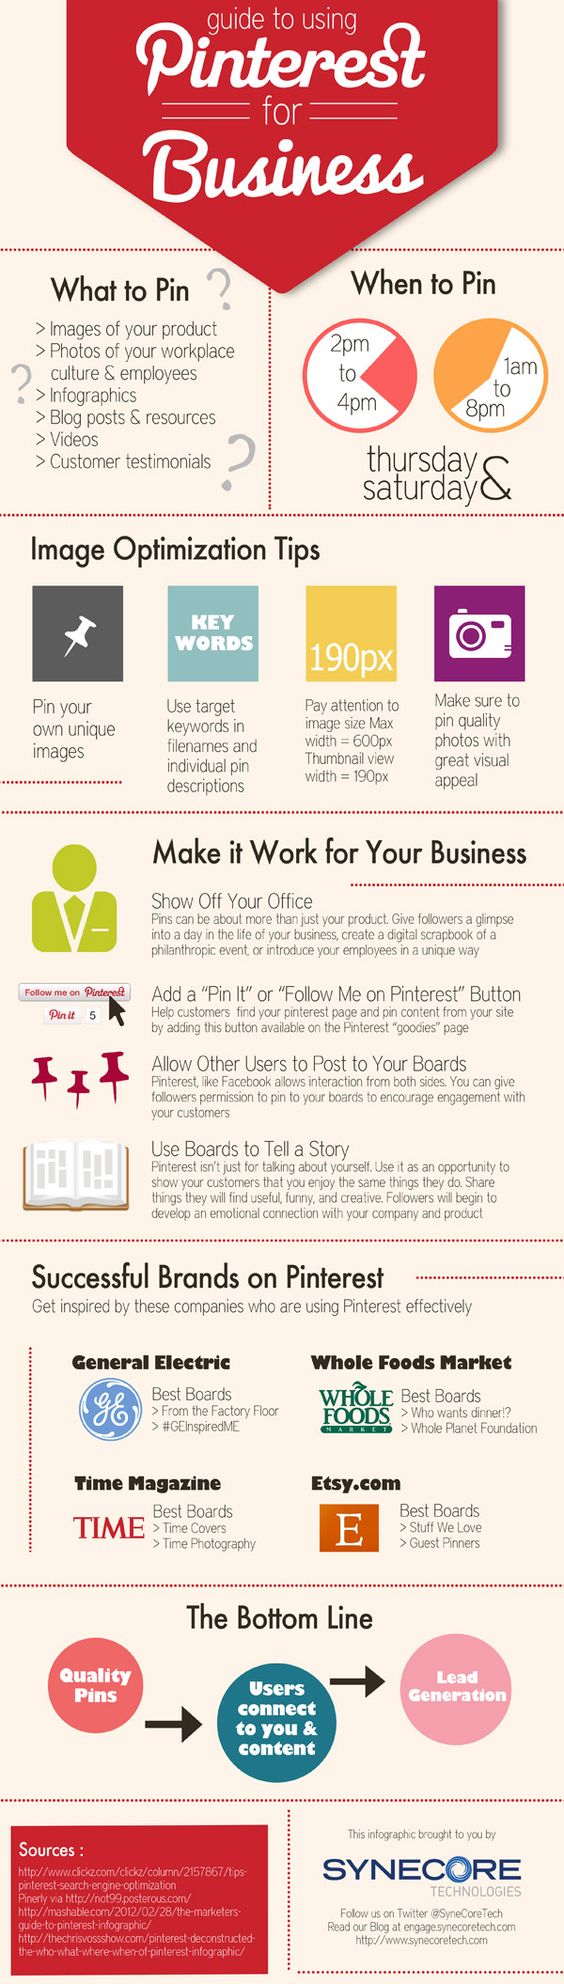 Pinterest for Business #infographic